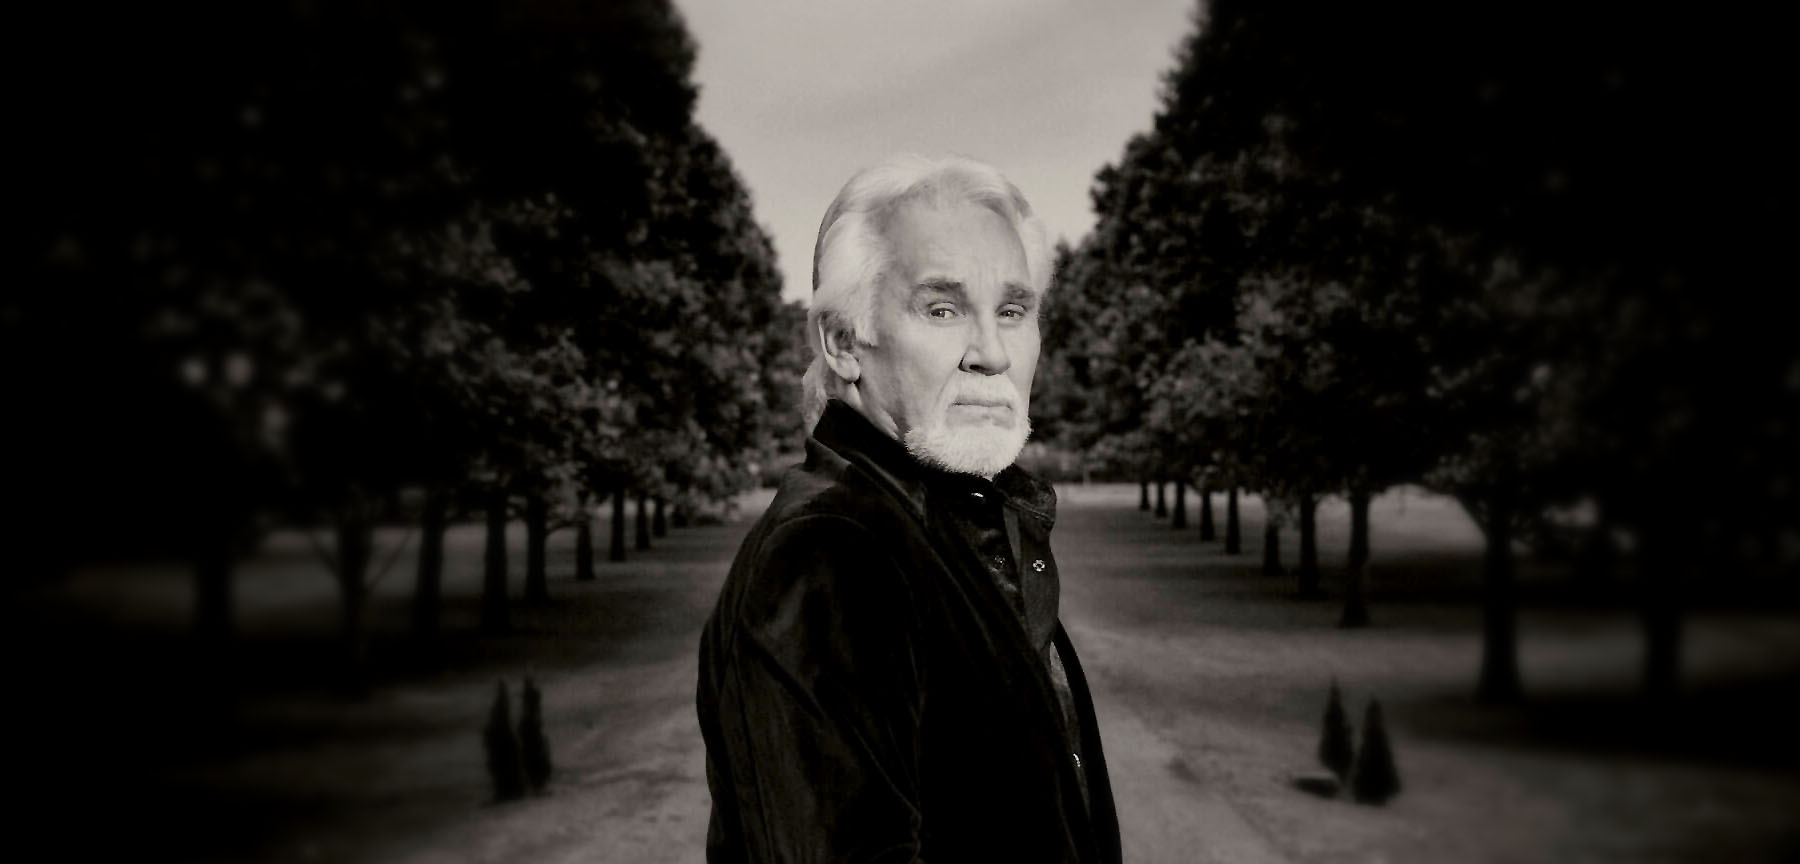 Kenny Rogers: Biography